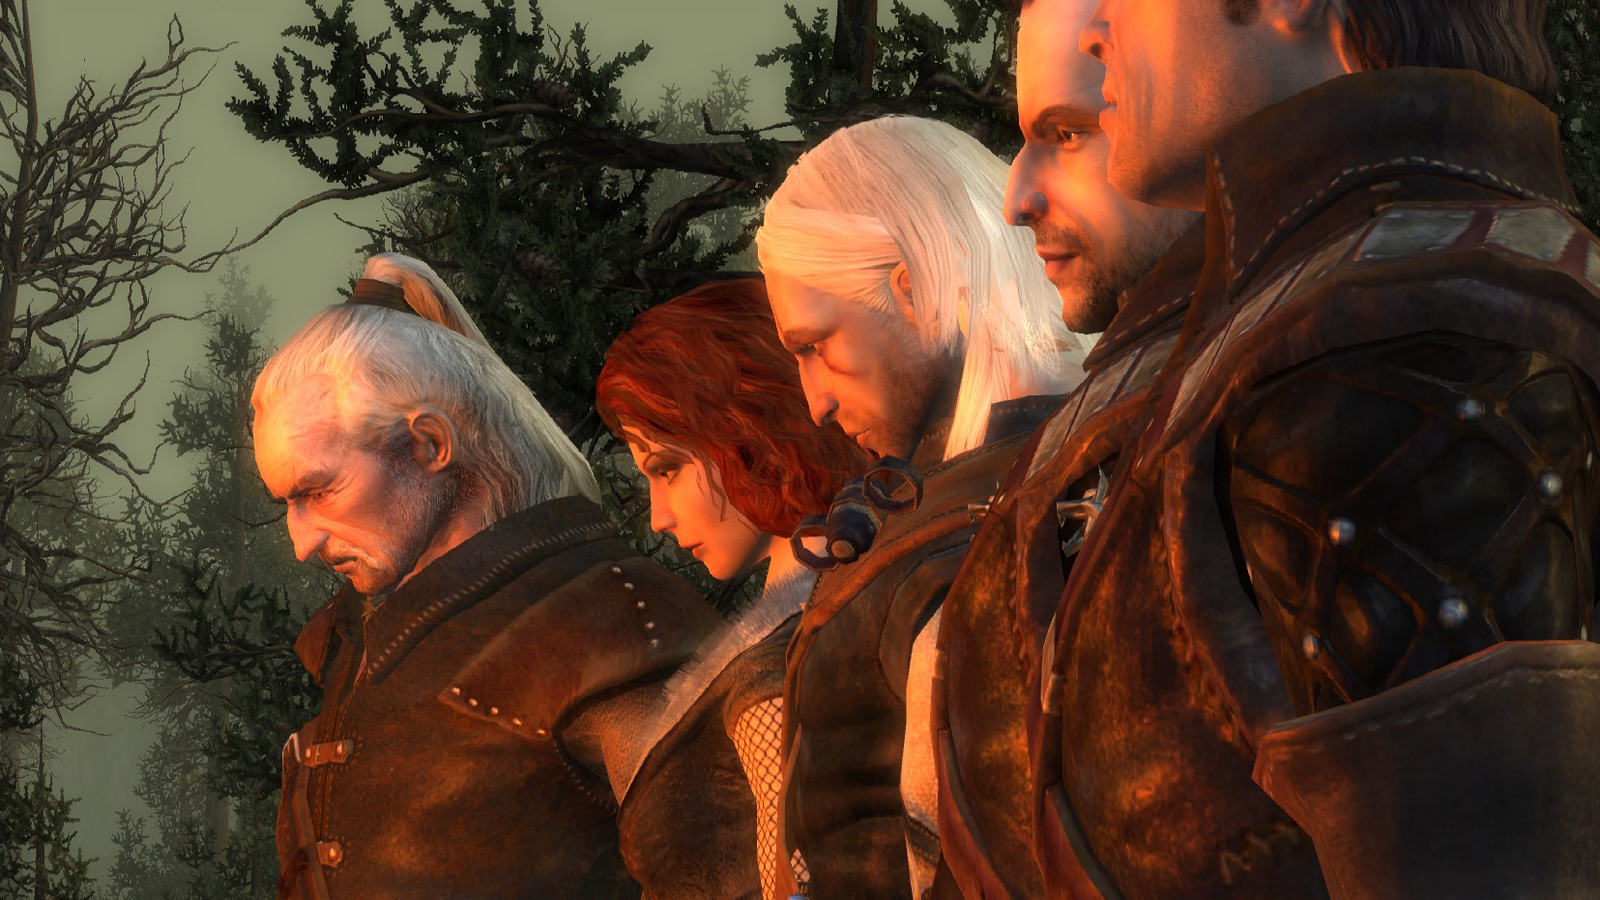 the witcher enhanced edition torrent pc games